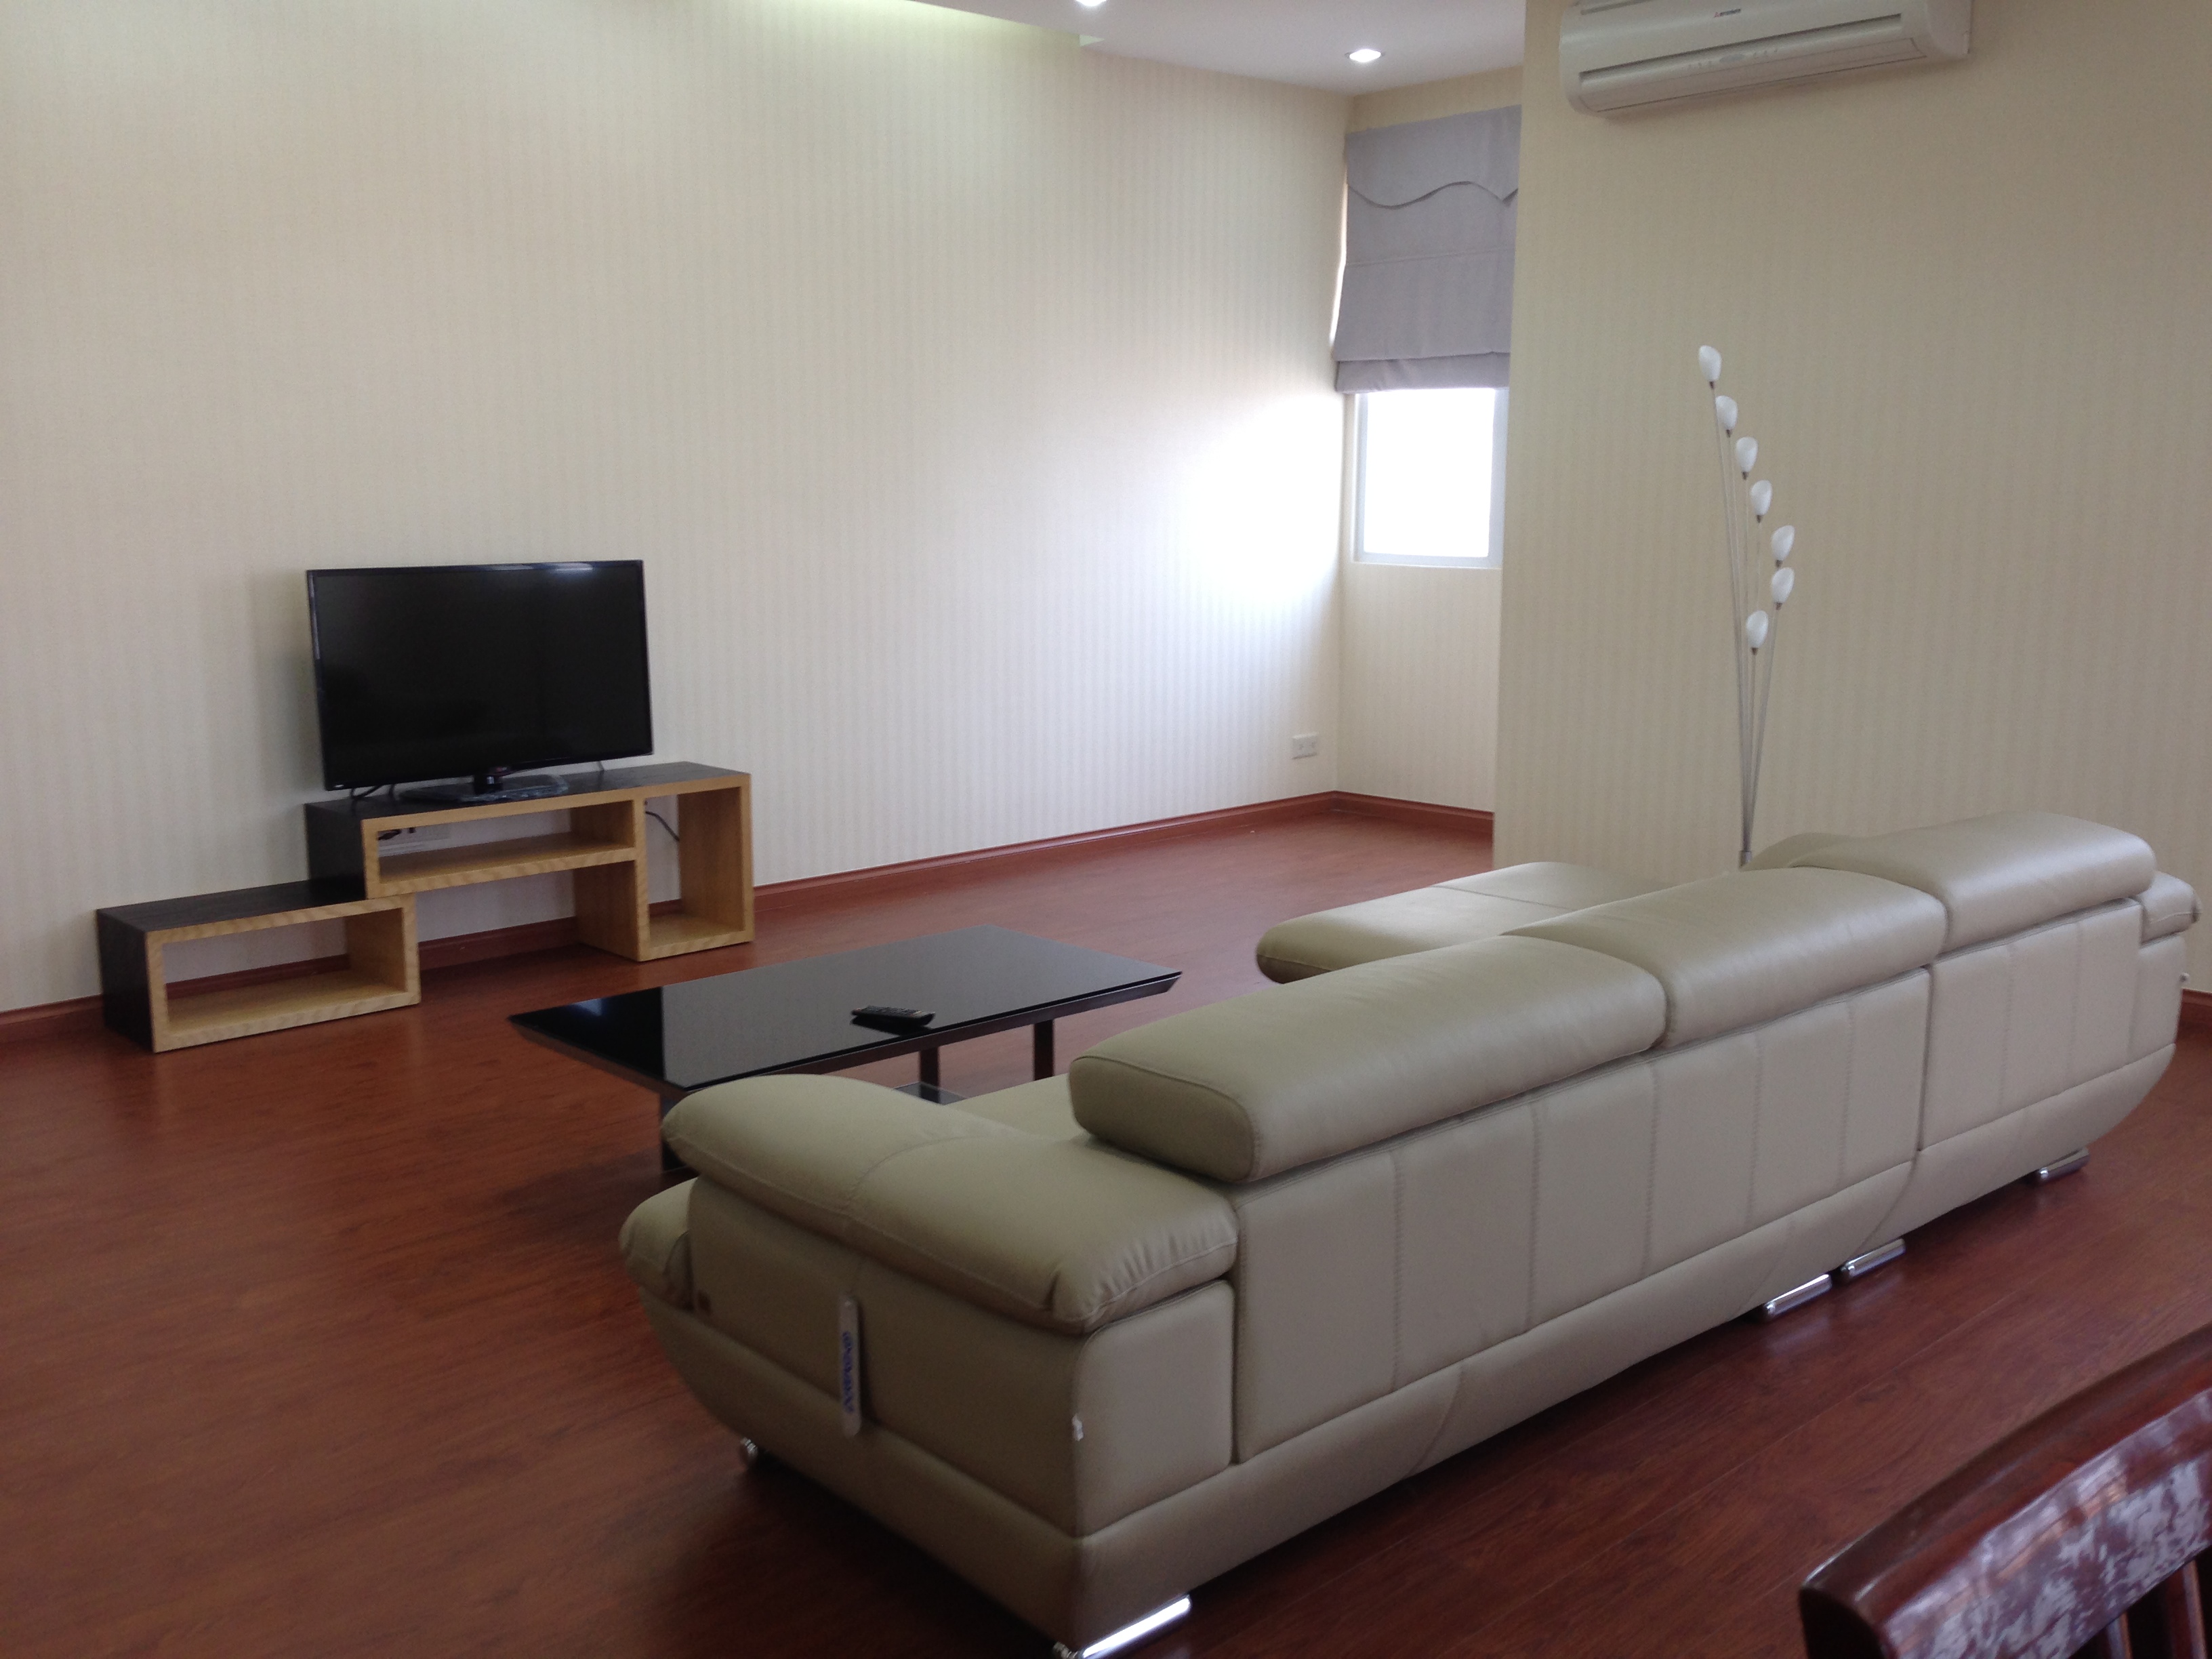 Spacious 3 bedroom apartment for rent in Trung Yen Plaza, Tran Duy Hung street, Cau Giay district, Hanoi